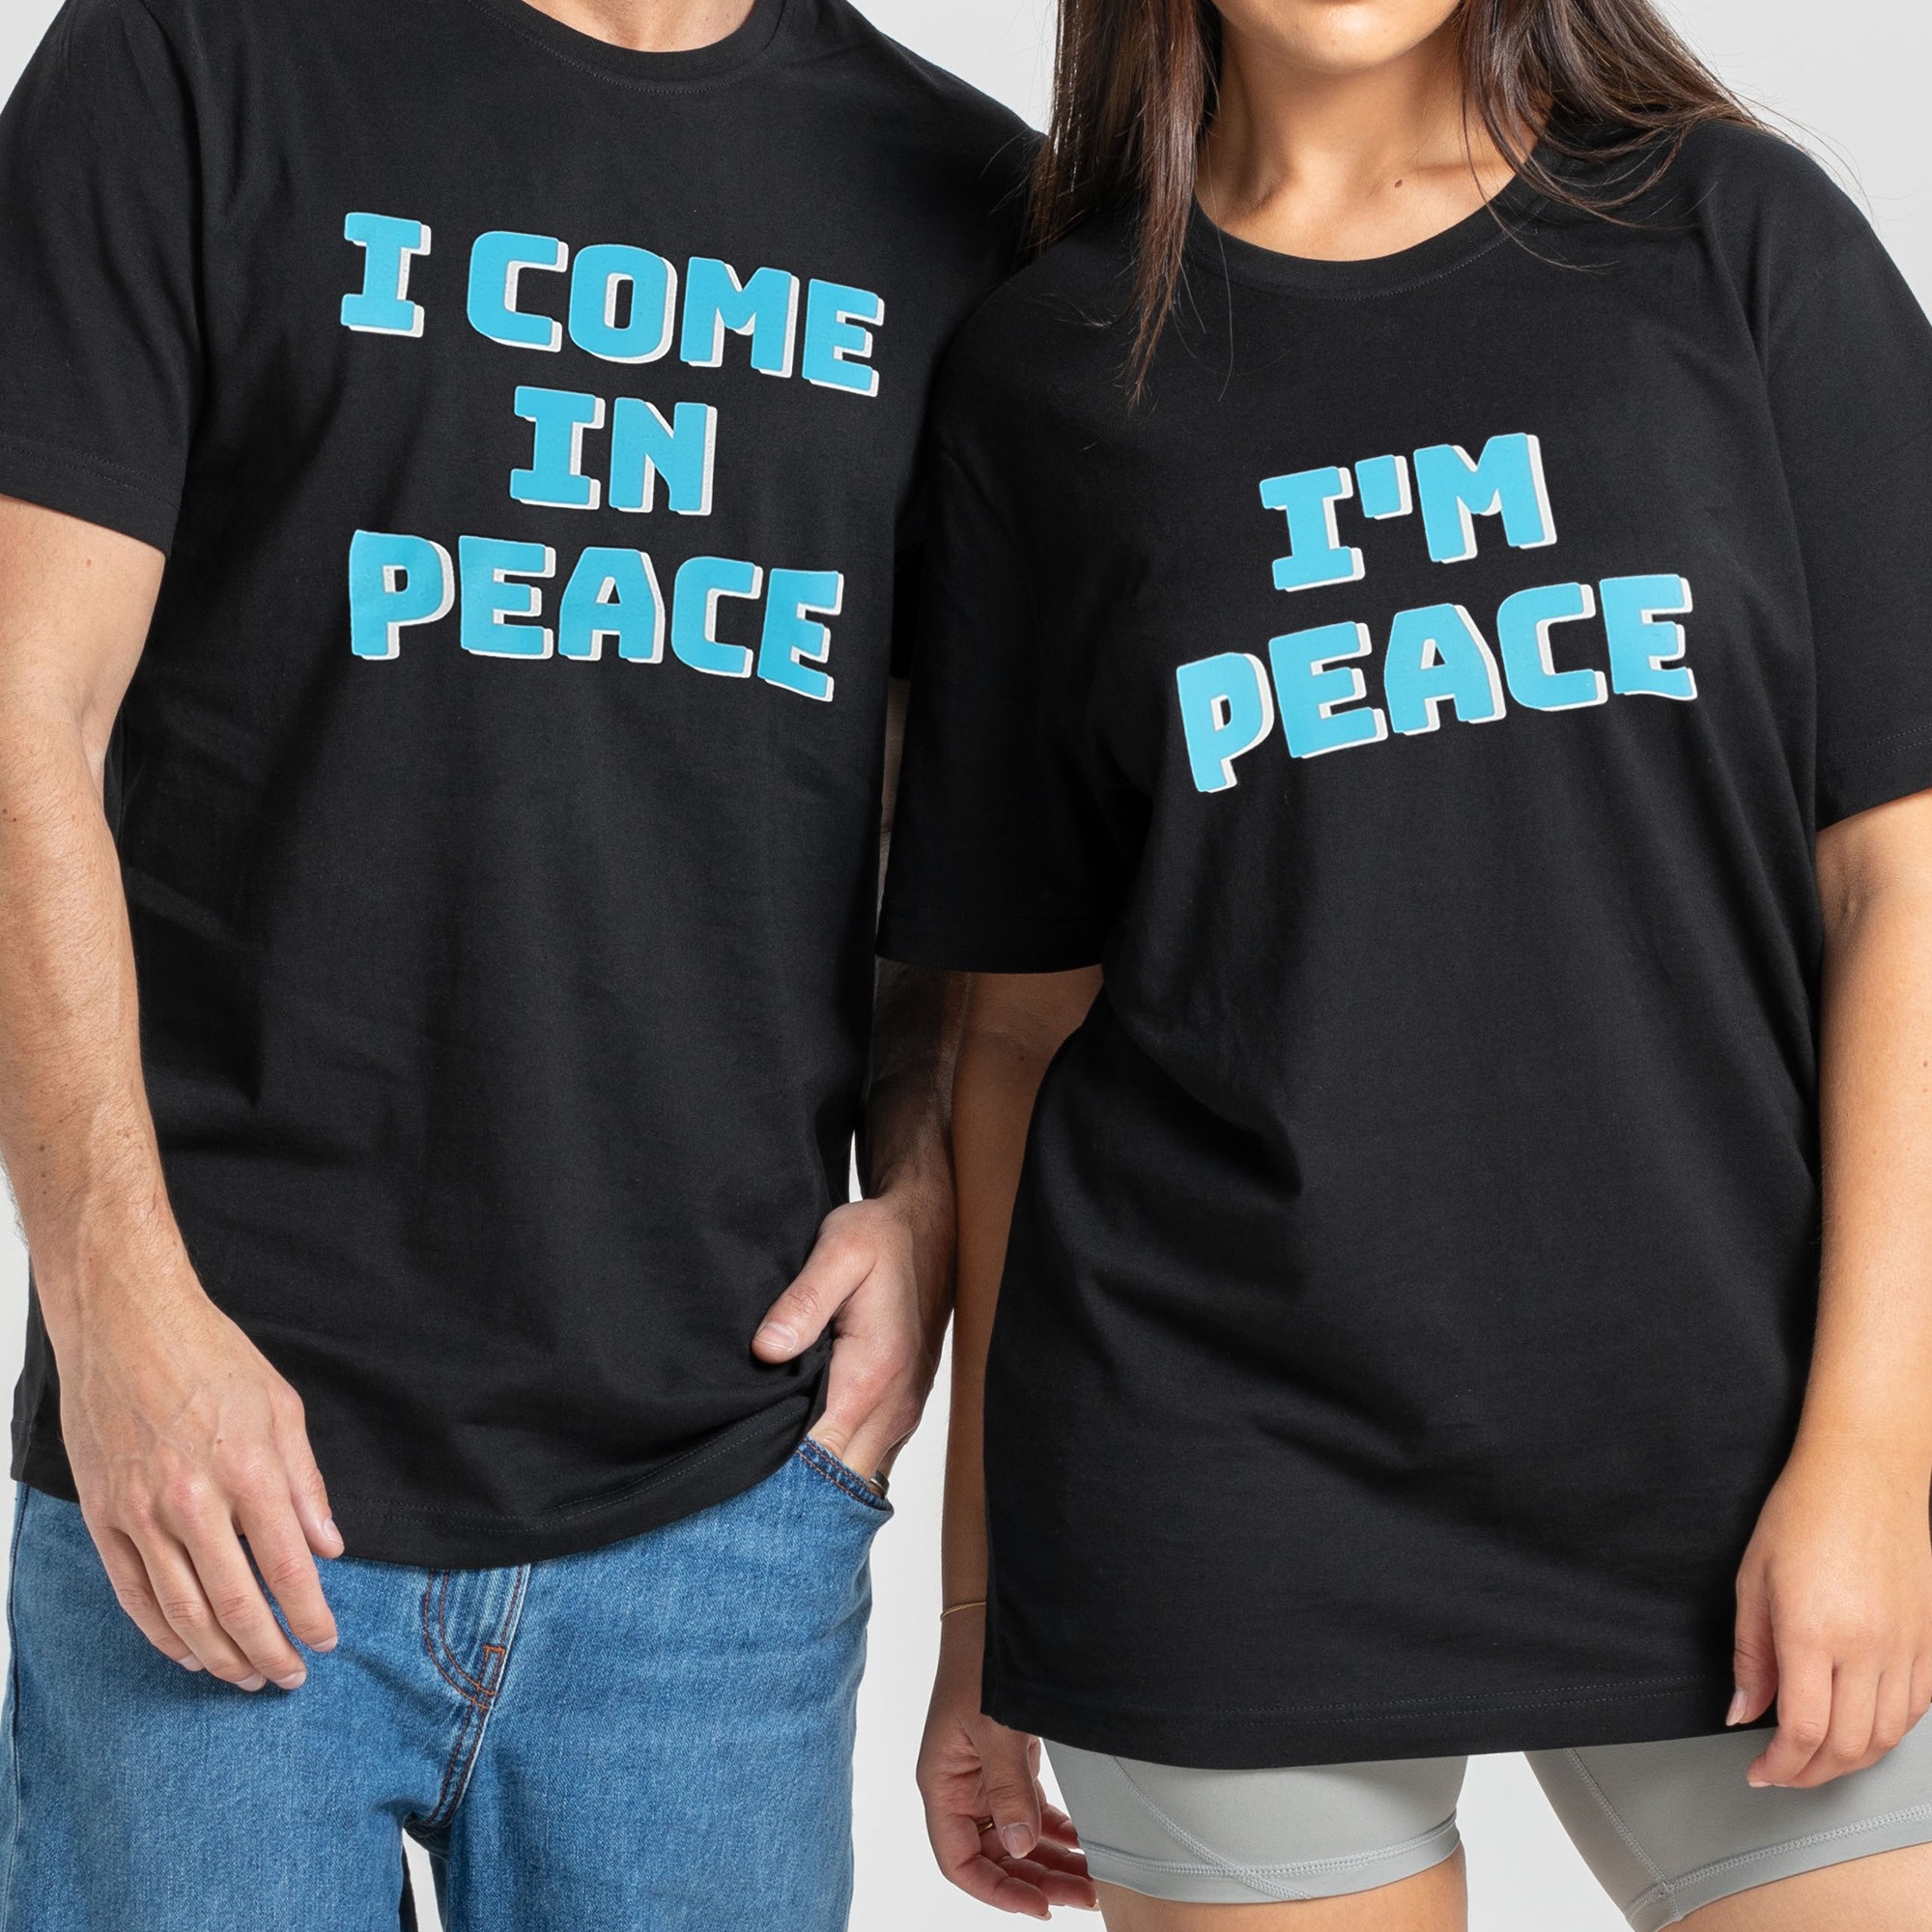 COME IN PEACE T-SHIRT COMBO